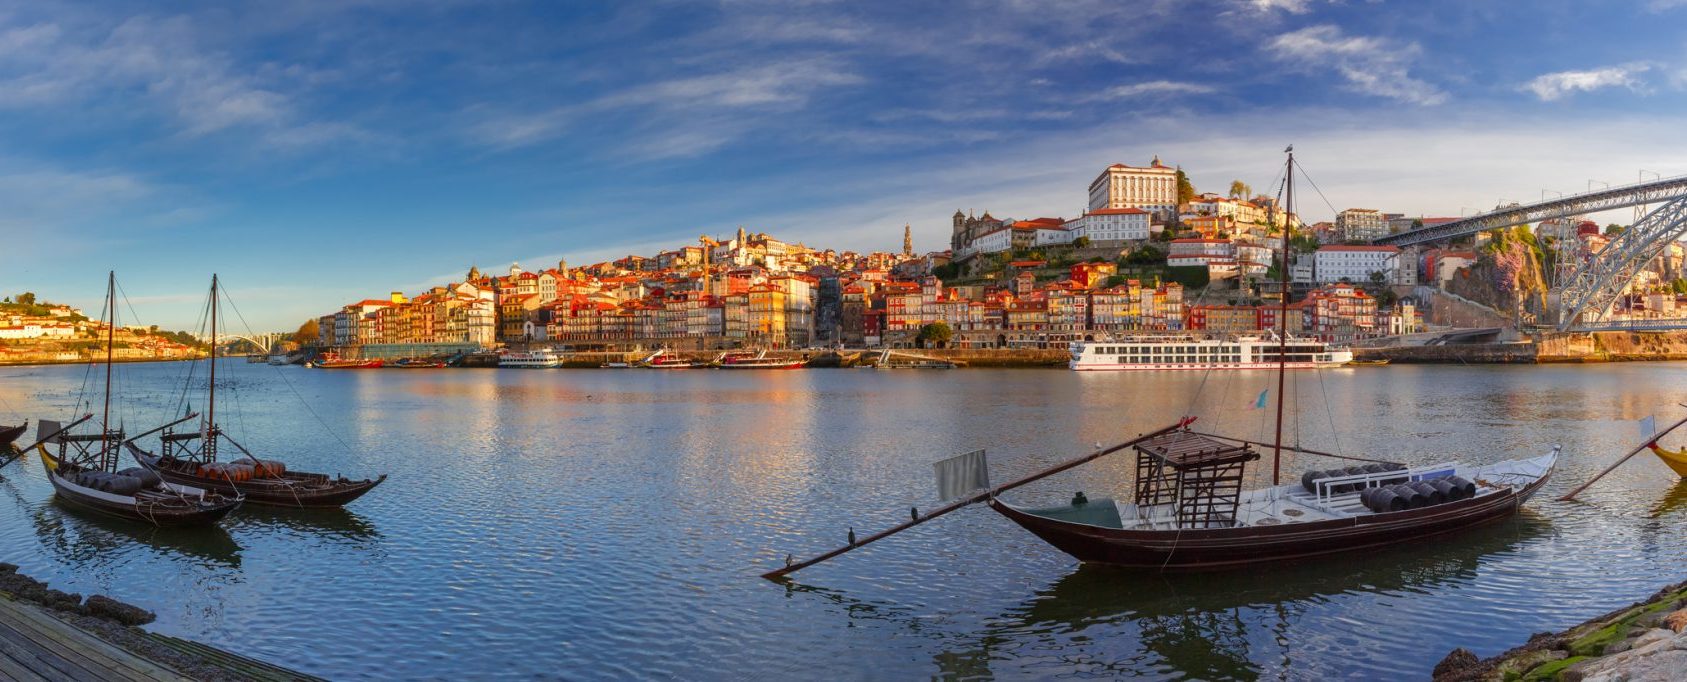 Douro - Panoramic-view-of-traditional-rabelo-boats-with-barrels-of-Port-wine-on-the-Douro-riverLowRes